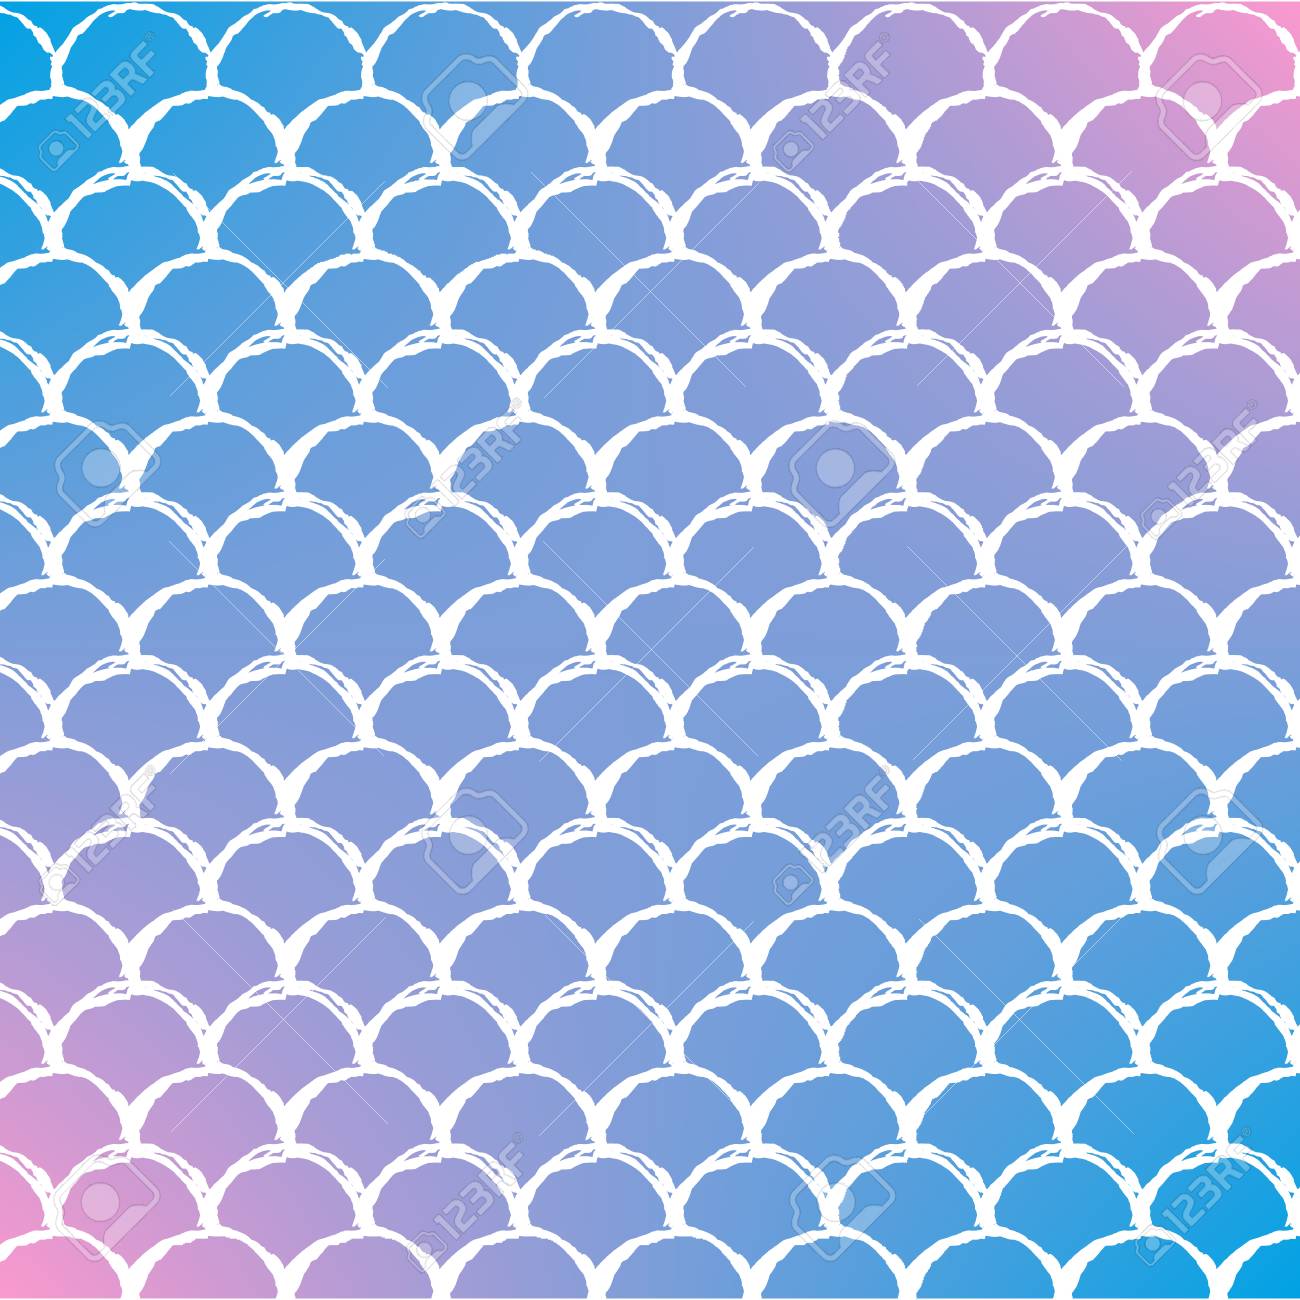 Mermaid Scale On Trendy Gradient Background Square Backdrop